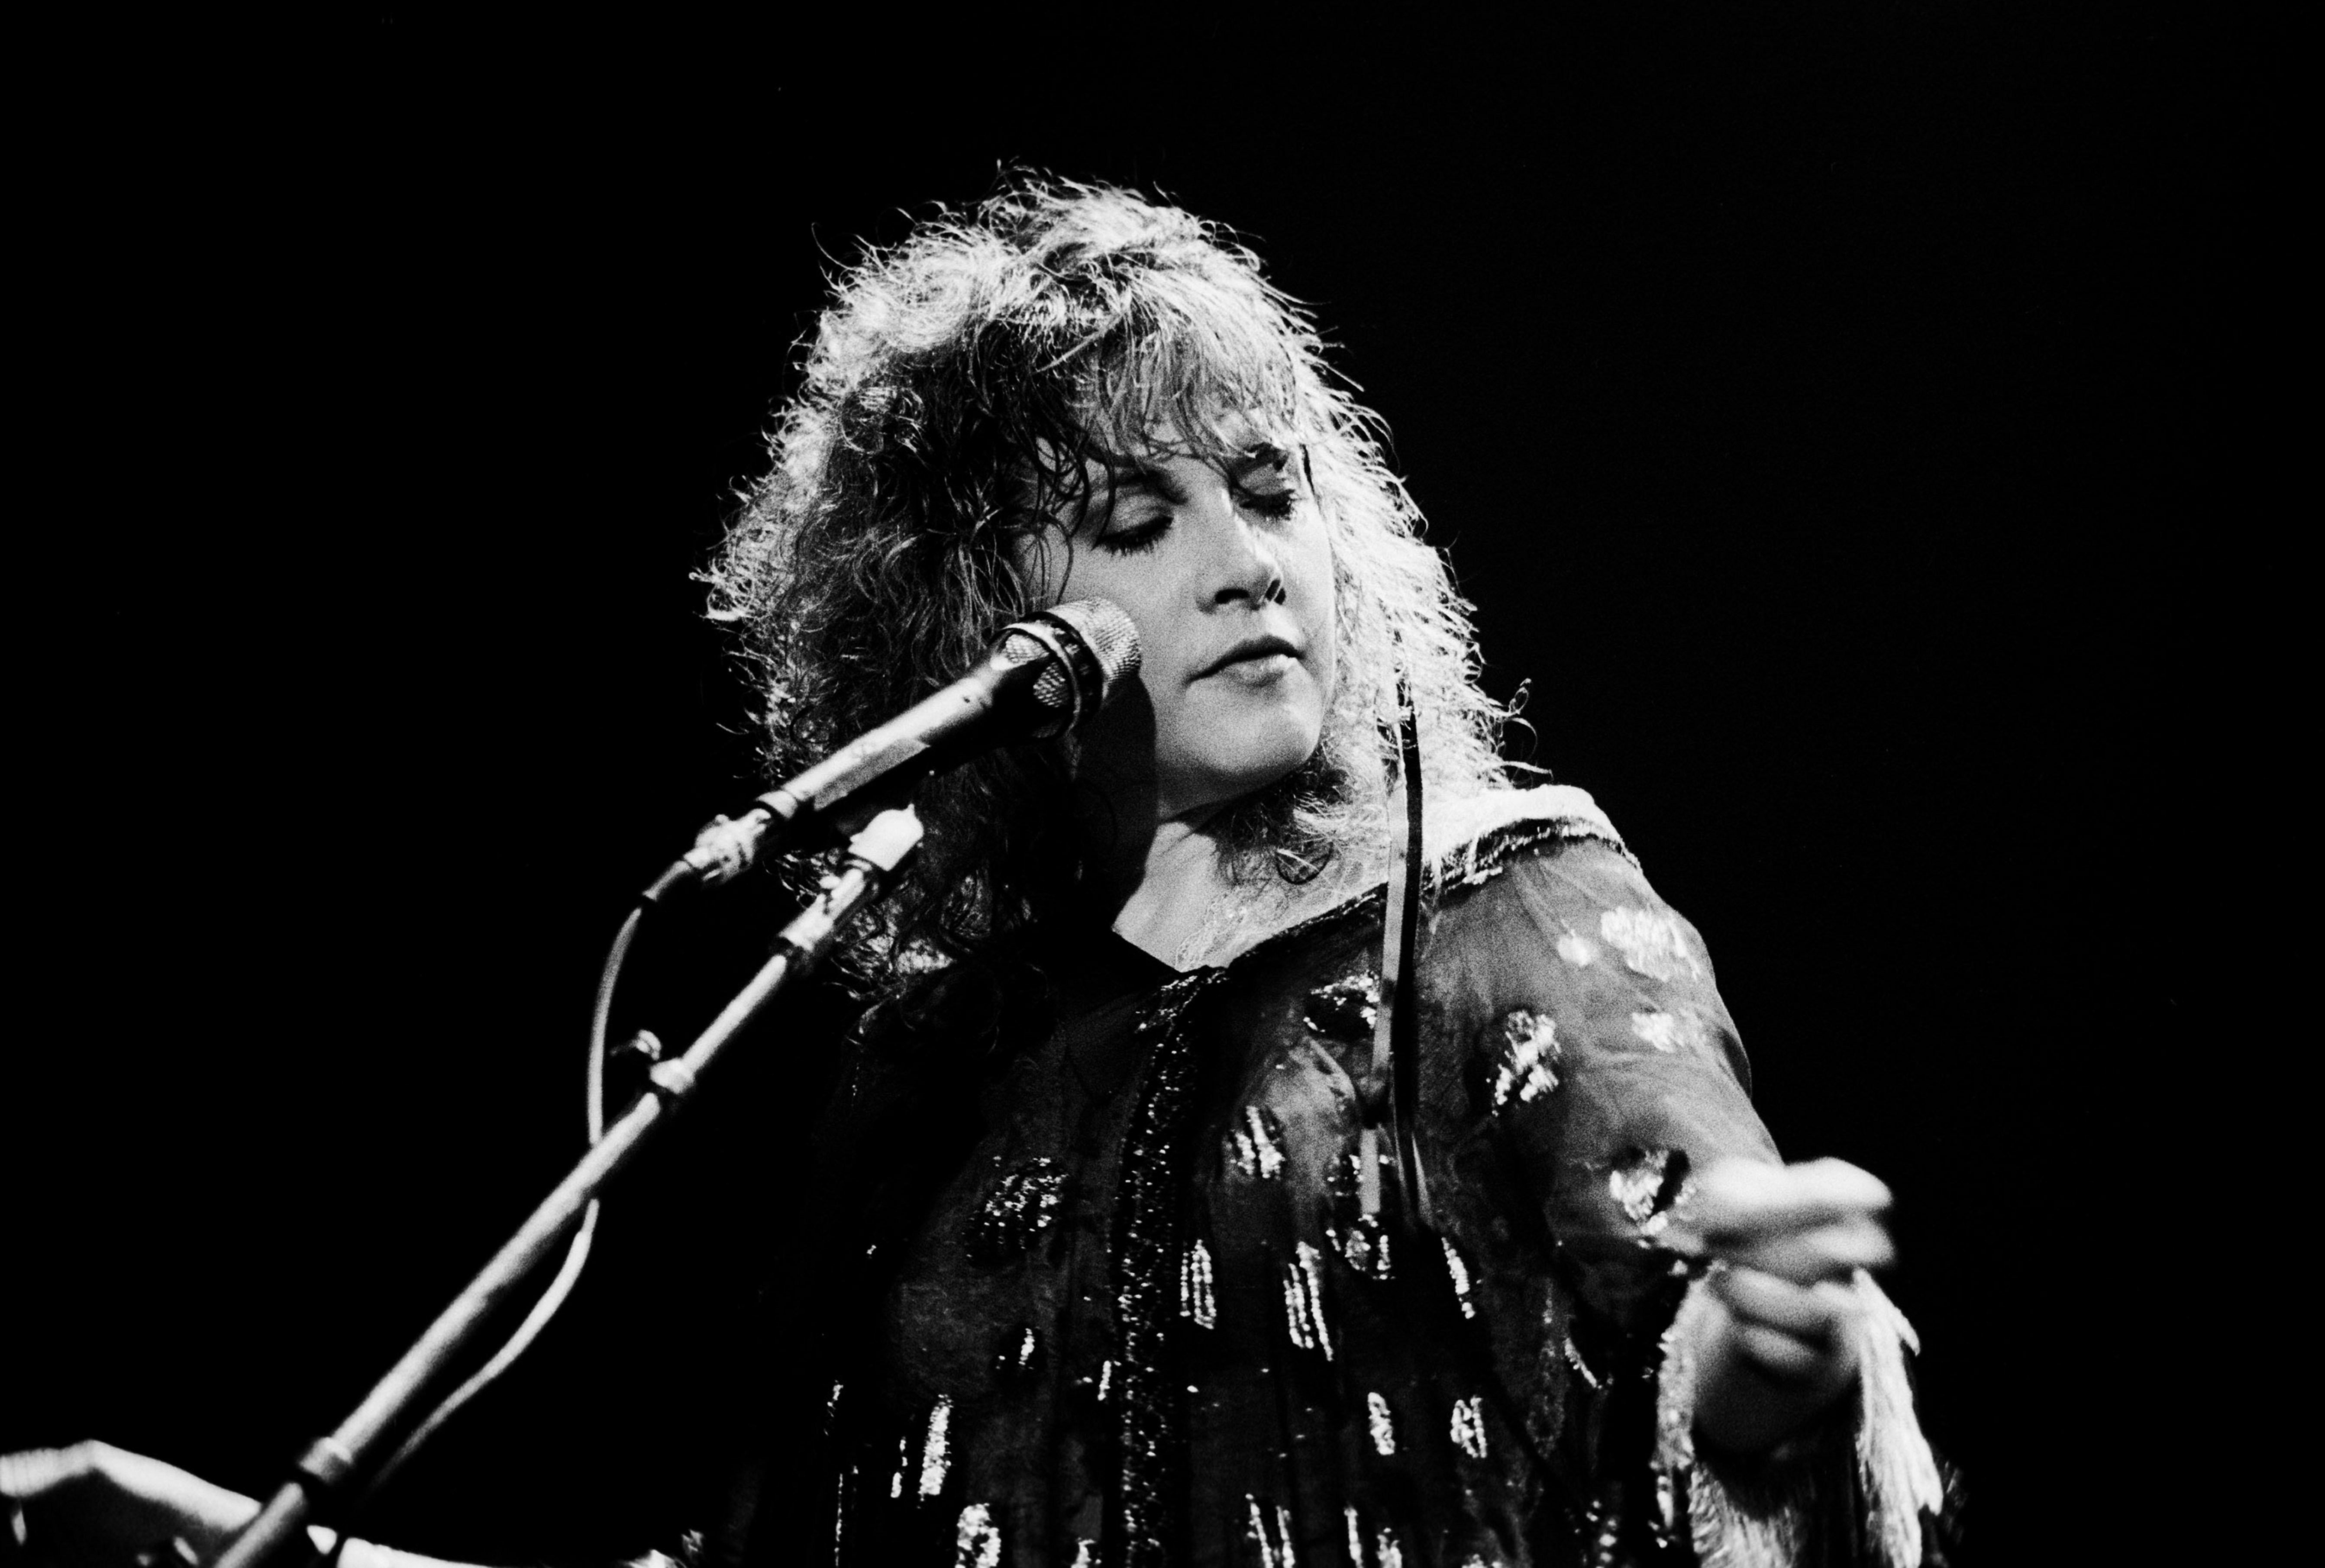 A black and white photo of Stevie Nicks wearing a dress and standing in front of a microphone.